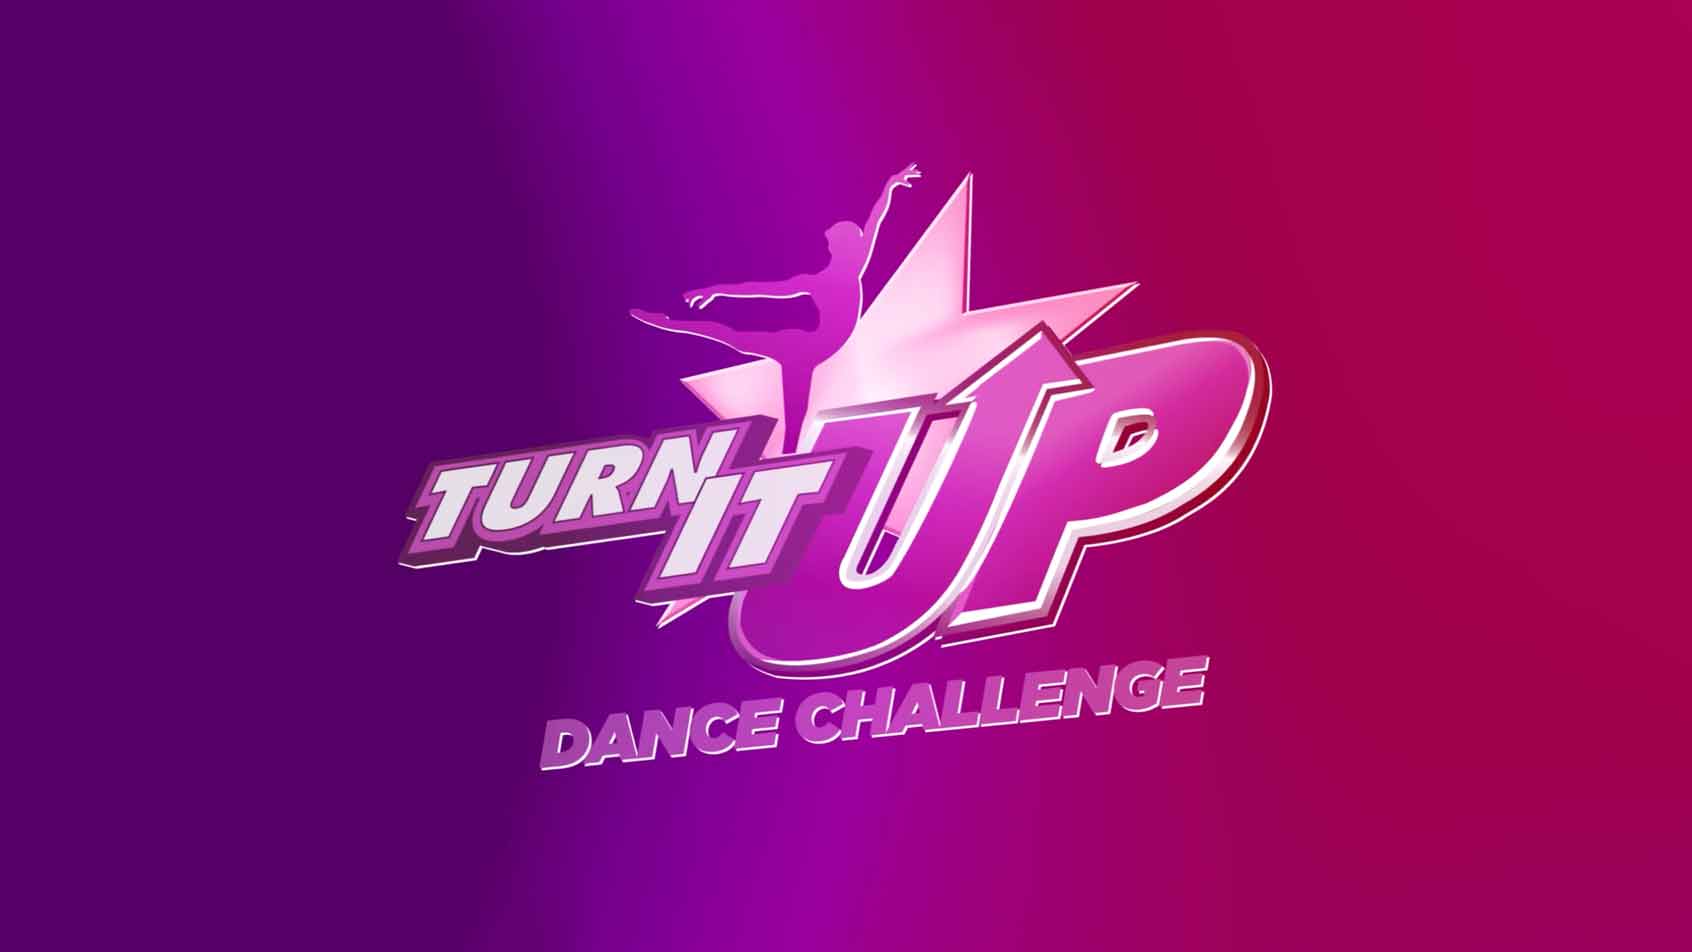 Turn Logo - Dance competitions, nationals & conventions | Turn It Up Dance Challenge